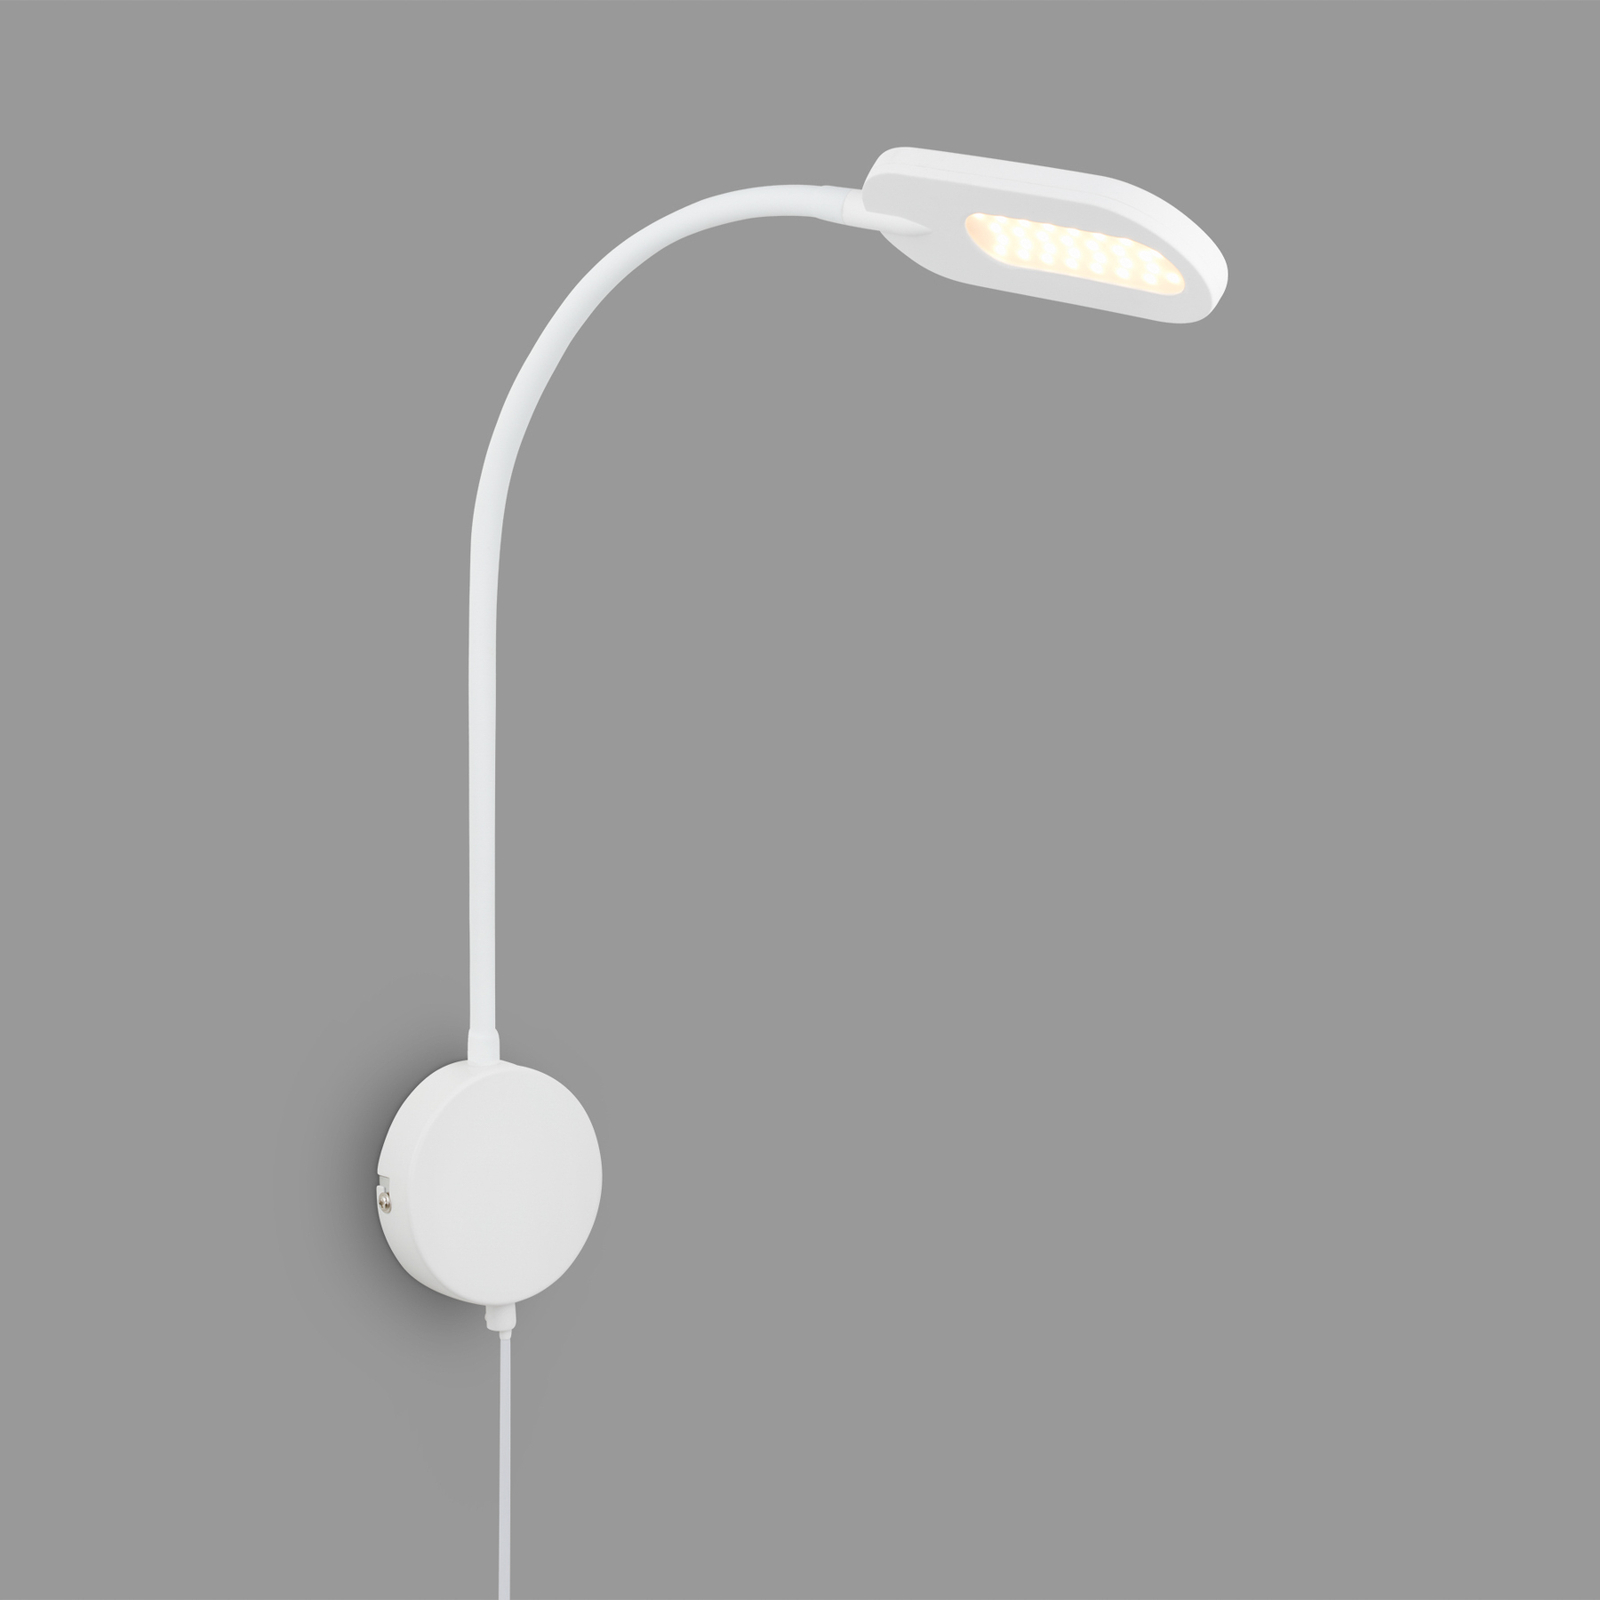 2177016 LED wall light with a dimmer, white